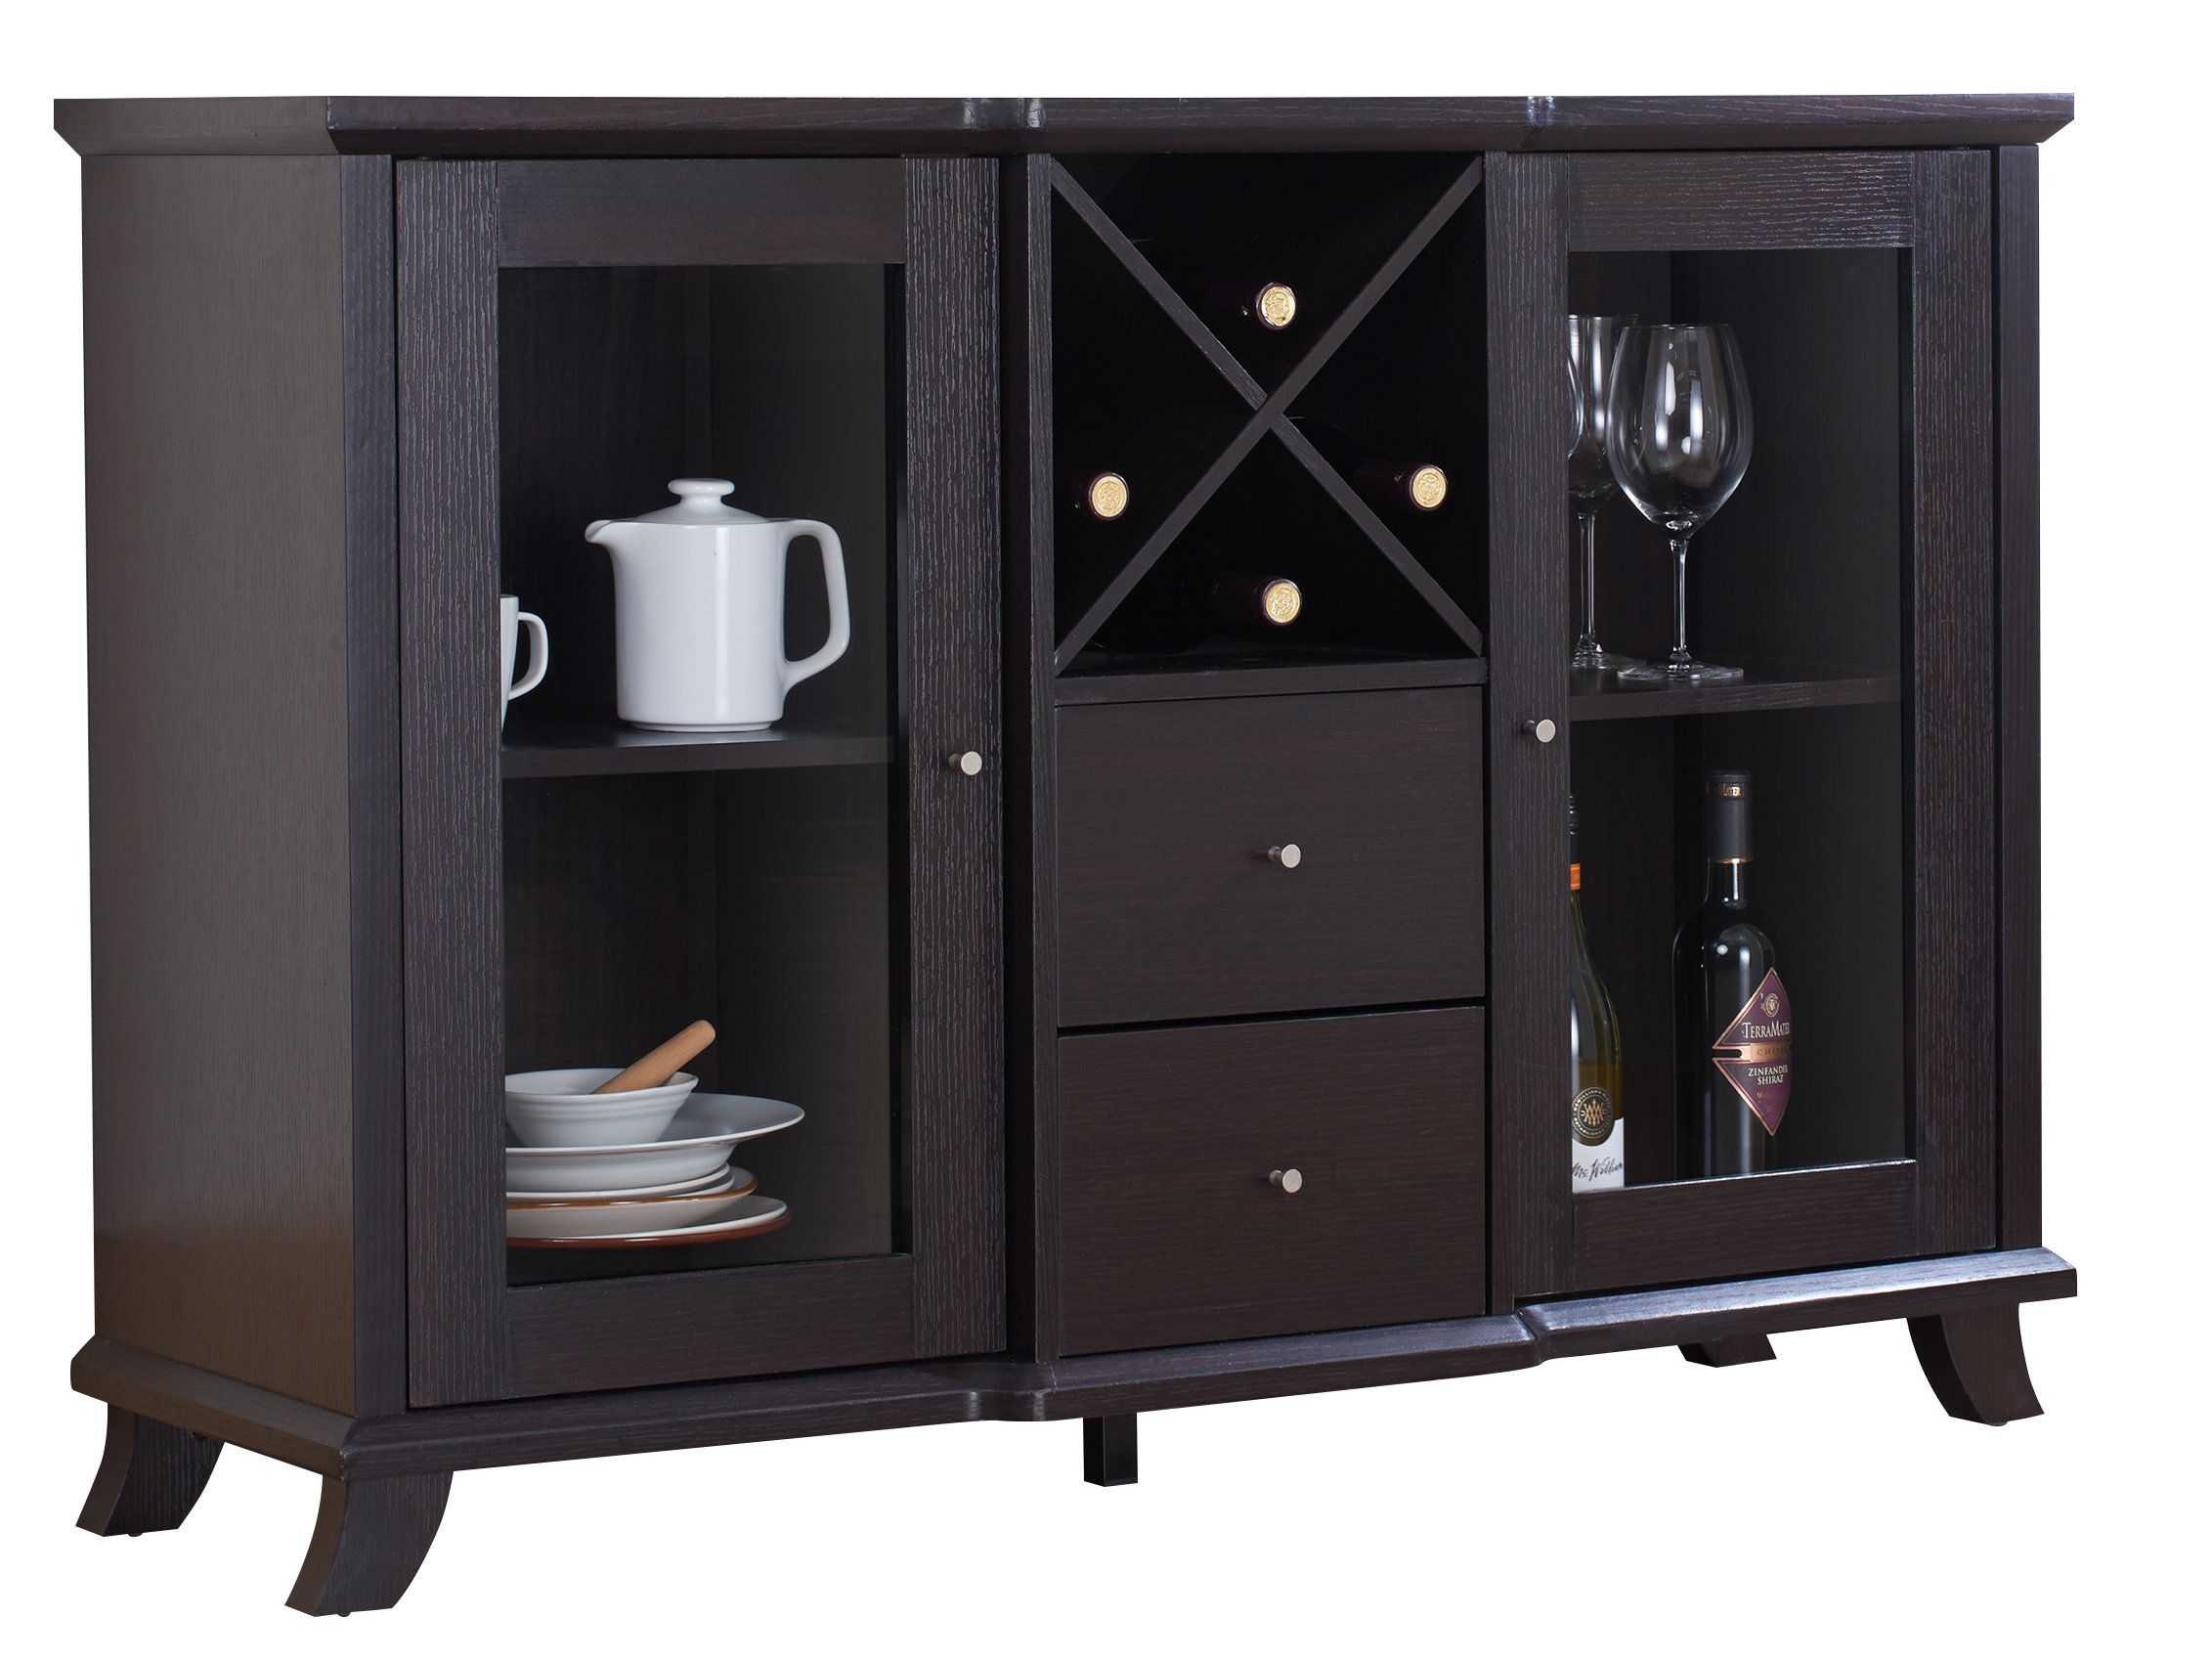 Farmhouse & Rustic Wine Bottle Storage Equipped Sideboards Inside Wooden Buffets With Two Side Door Storage Cabinets And Stemware Rack (View 16 of 30)